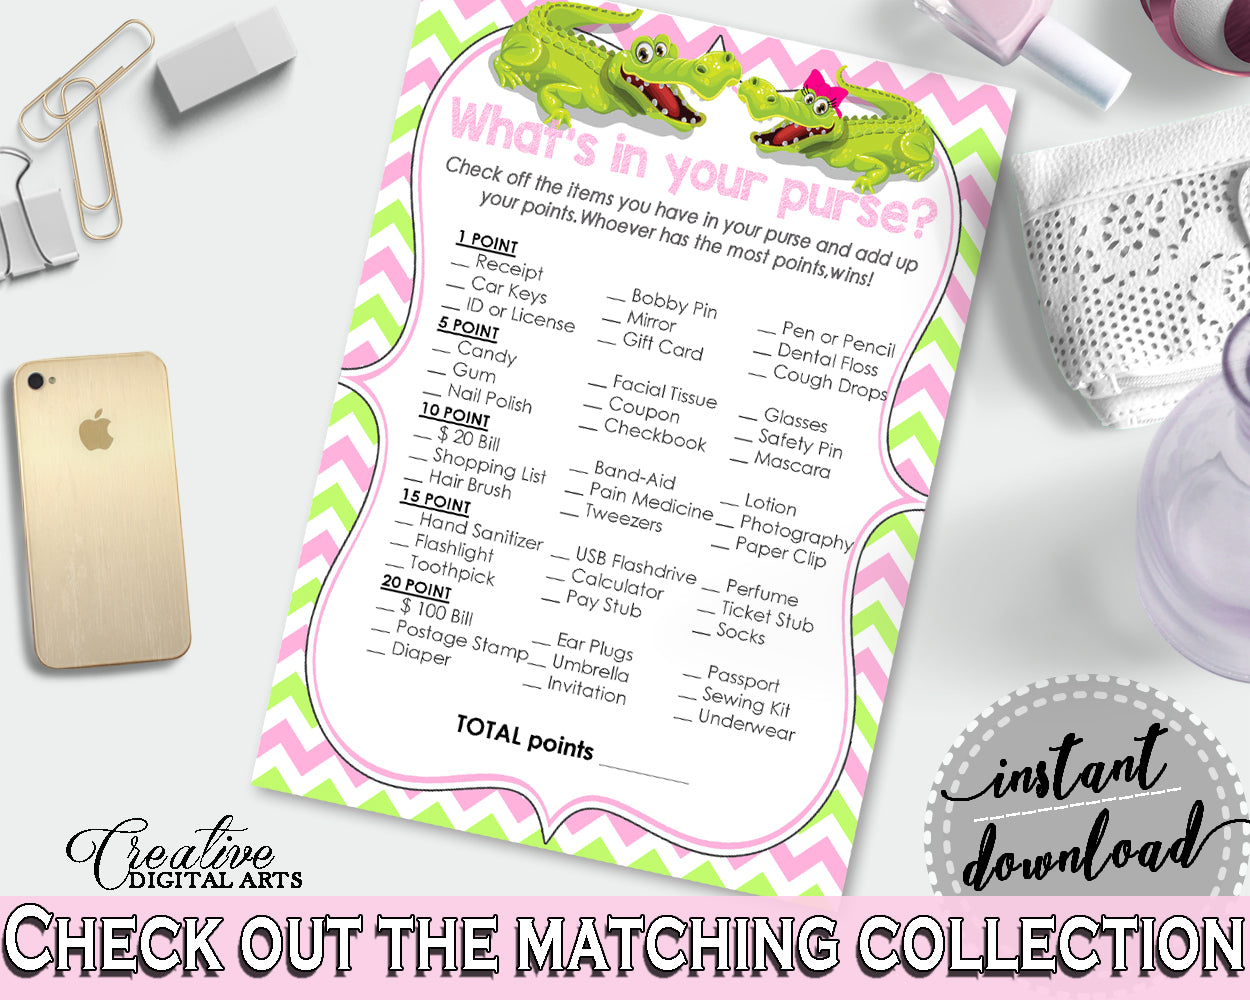 WHAT'S IN YOUR PURSE baby shower game with green alligator and pink color theme, instant download - ap001